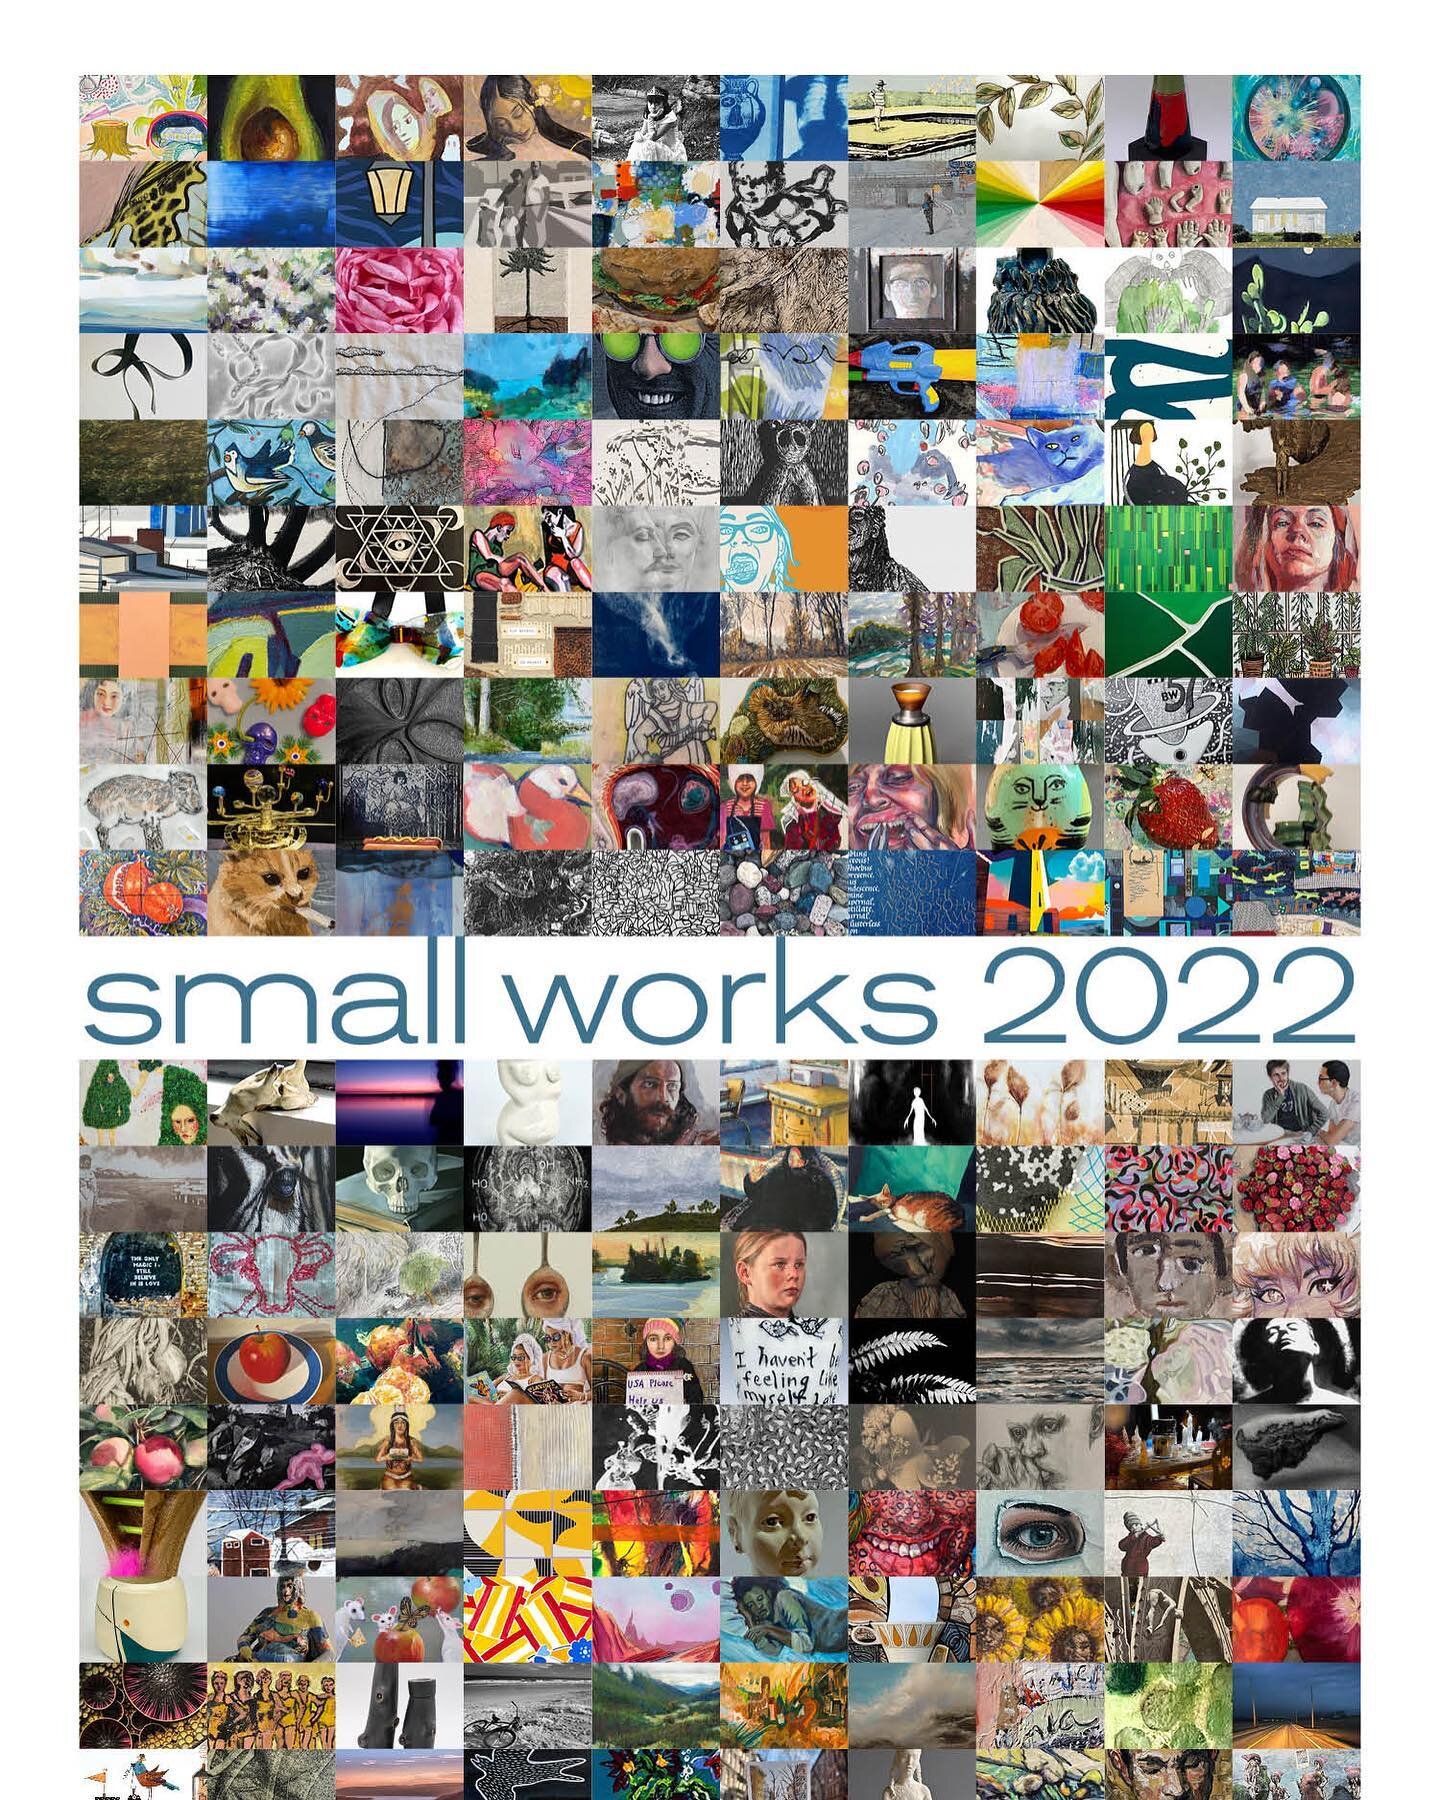 I have a piece in the 9th Annual Small Works Exhibition at Main Street Arts this November-December. The show is a national juried exhibition of artwork featuring works of art by 200 artists from 32 states. All artwork in the show measures 12 inches o